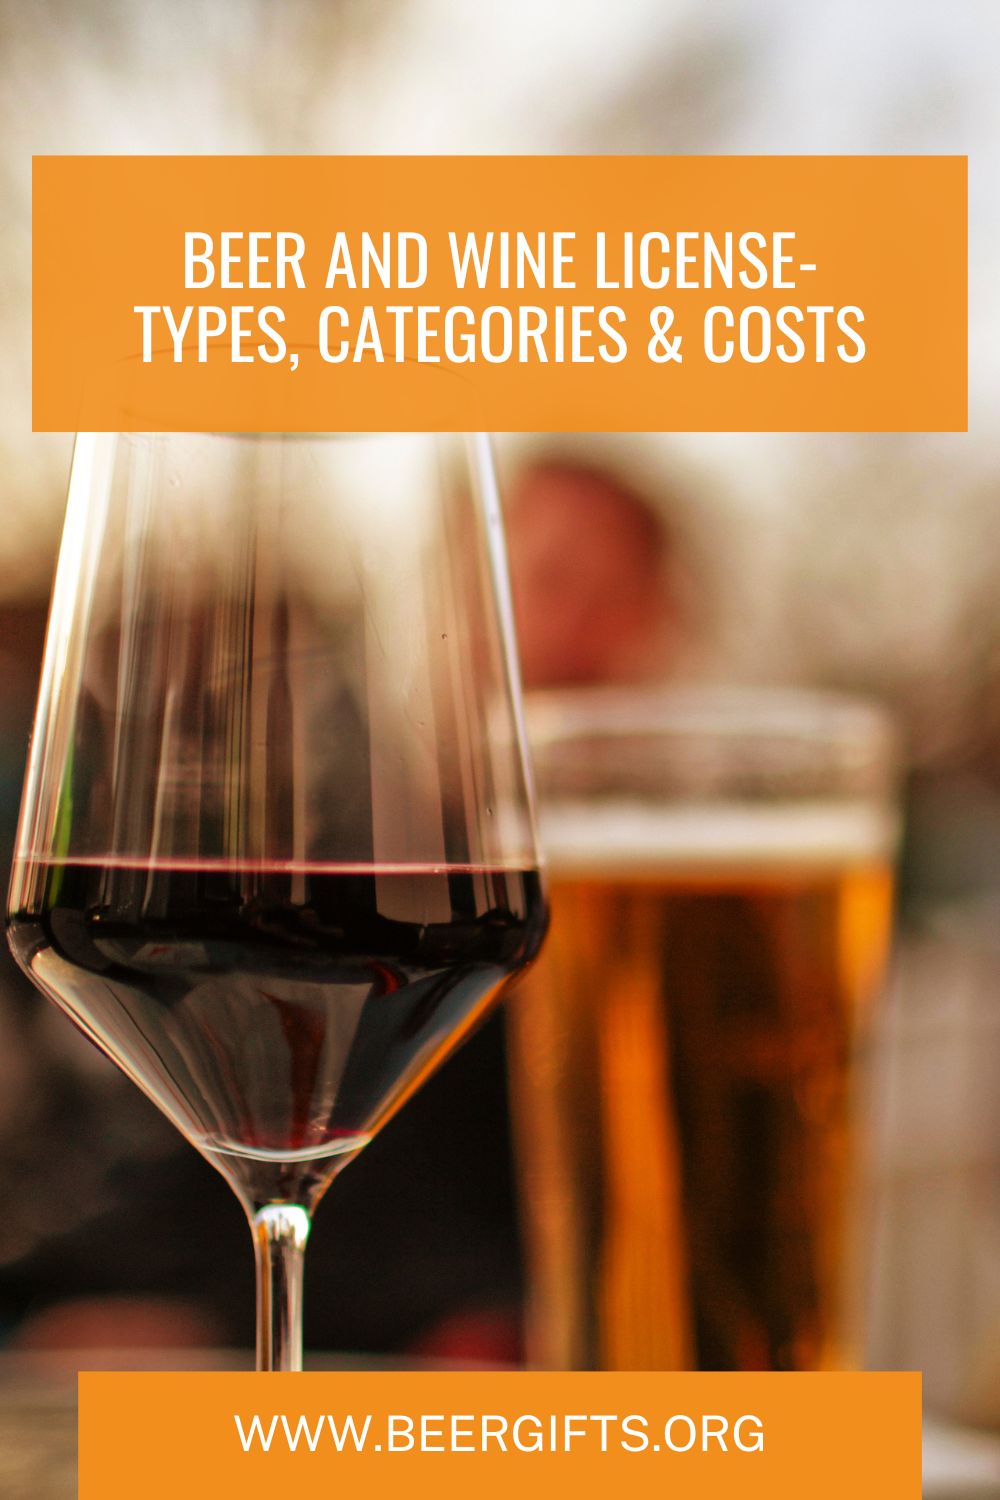 Beer and Wine License: Types, Categories & Costs 2